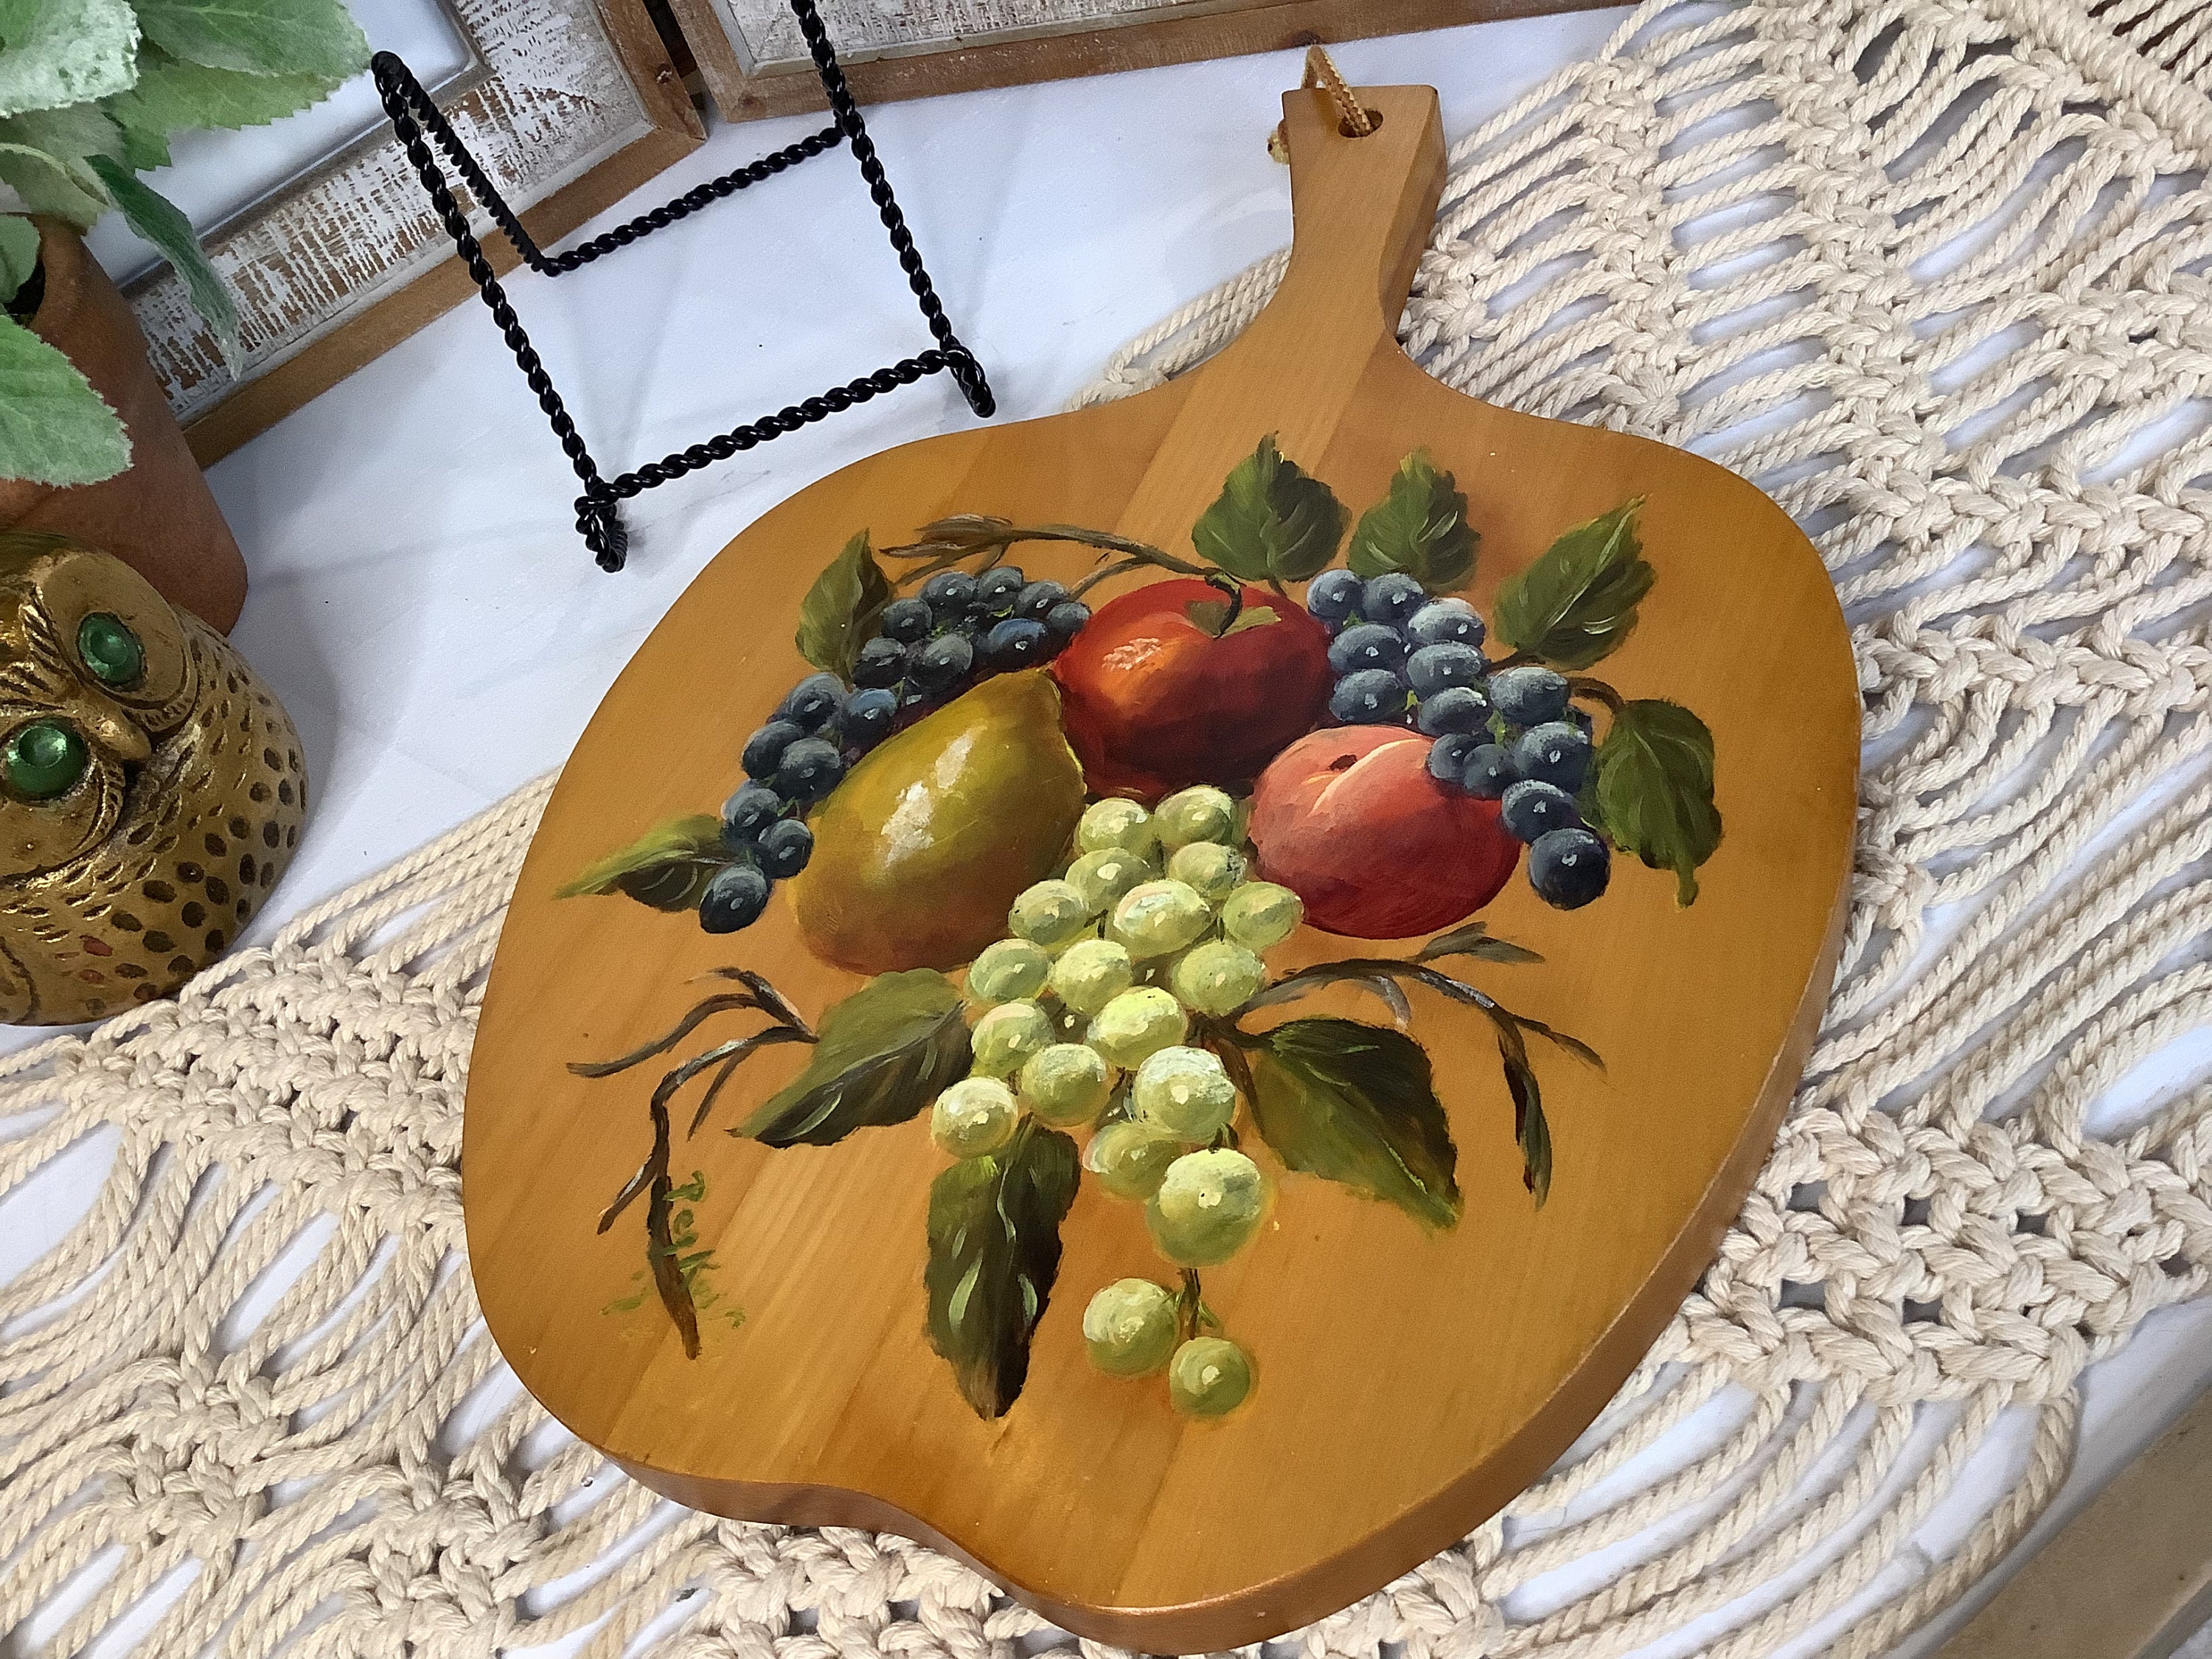 Vintage Wooden Wood Handmade & Painted Pineapple Cutting Board Decor 16x  9